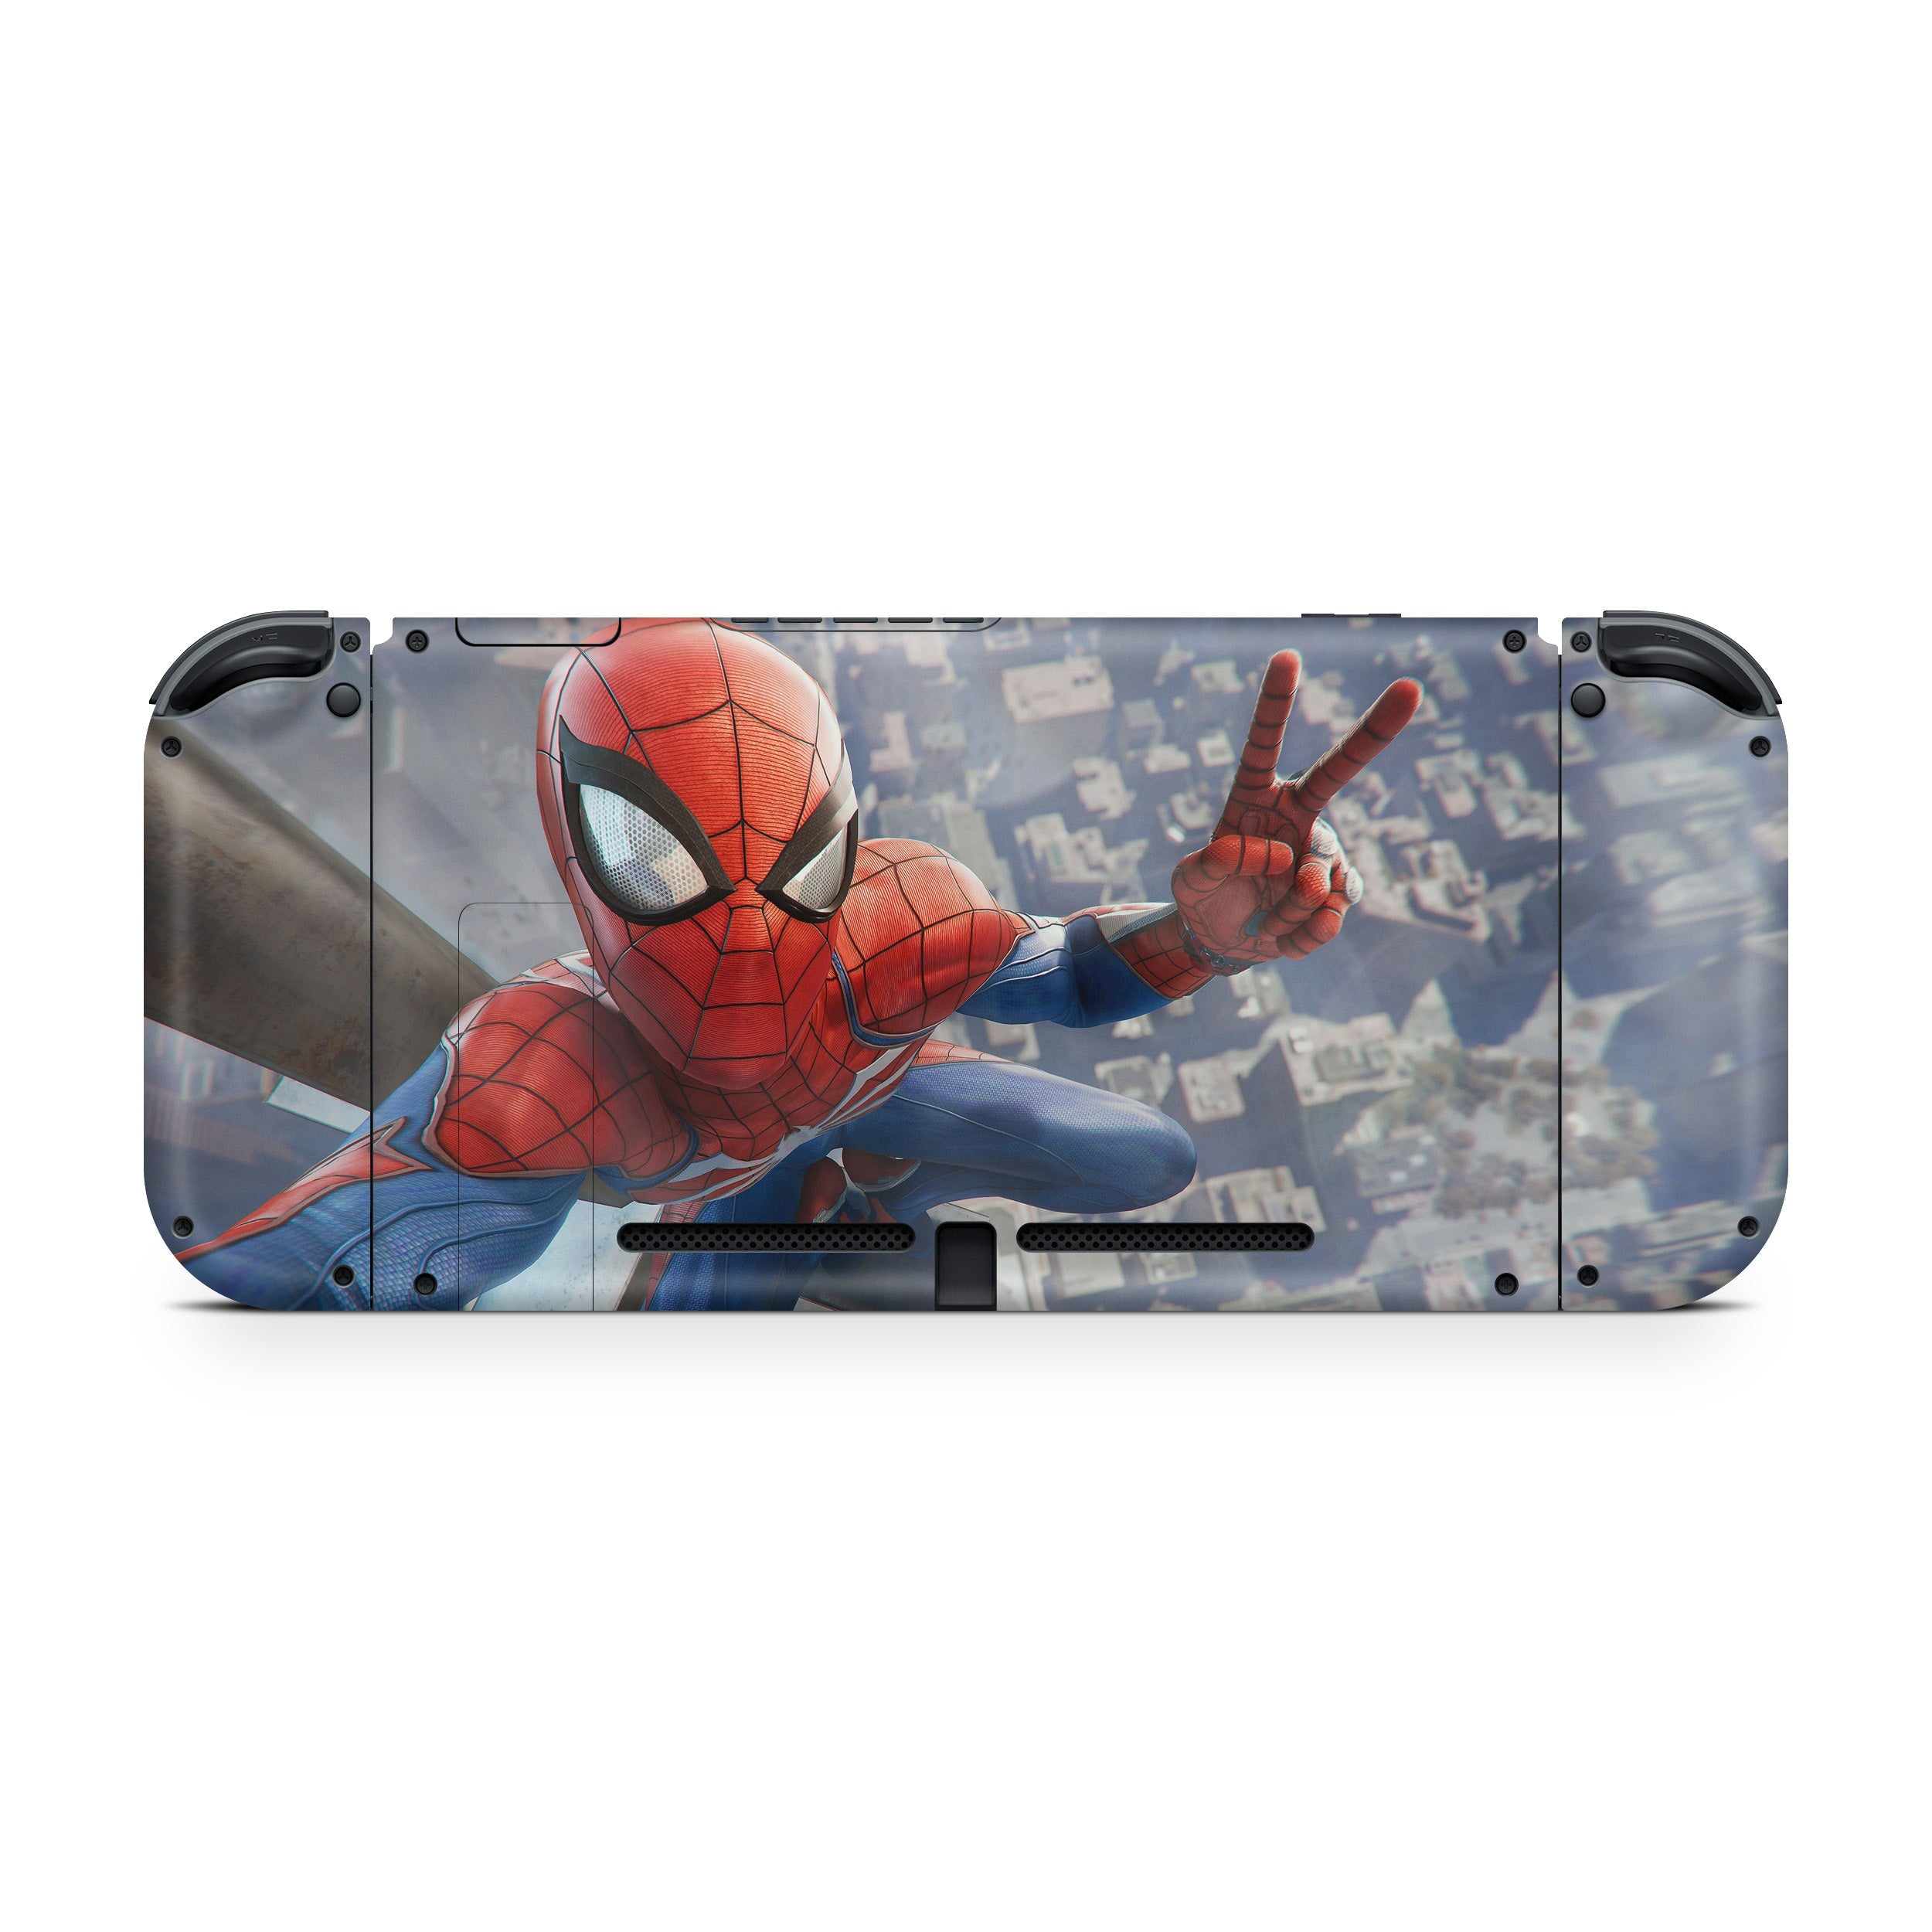 A video game skin featuring a Marvel Spiderman design for the Nintendo Switch.